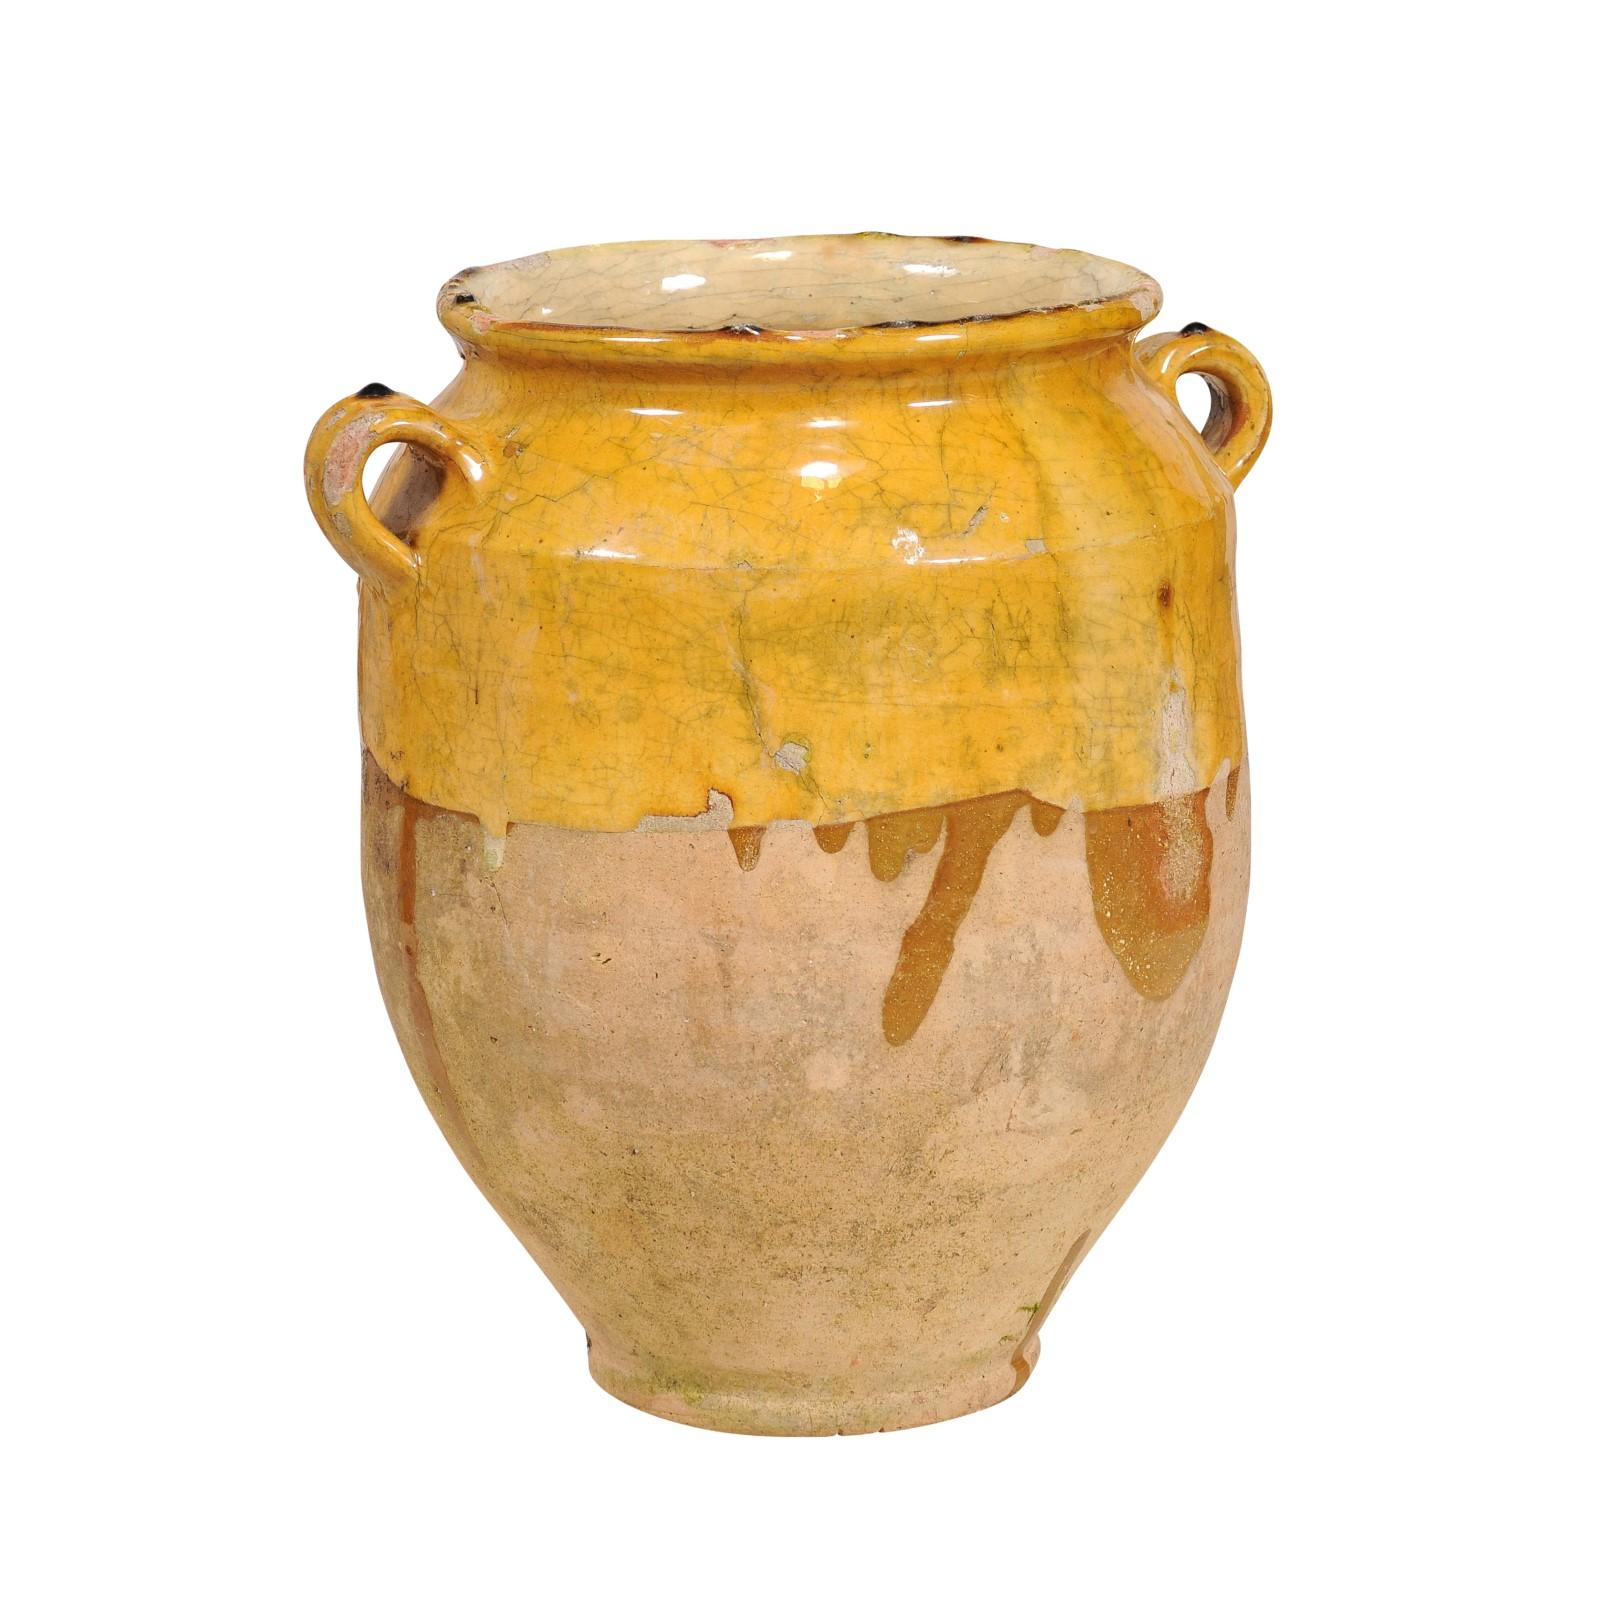 A French Provincial pot à confit pottery from the 19th century with yellow glaze, two lateral handles and rustic patina. Embrace the rustic charm and timeless tradition of this French Provincial pot à confit from the 19th century. Its sun-kissed